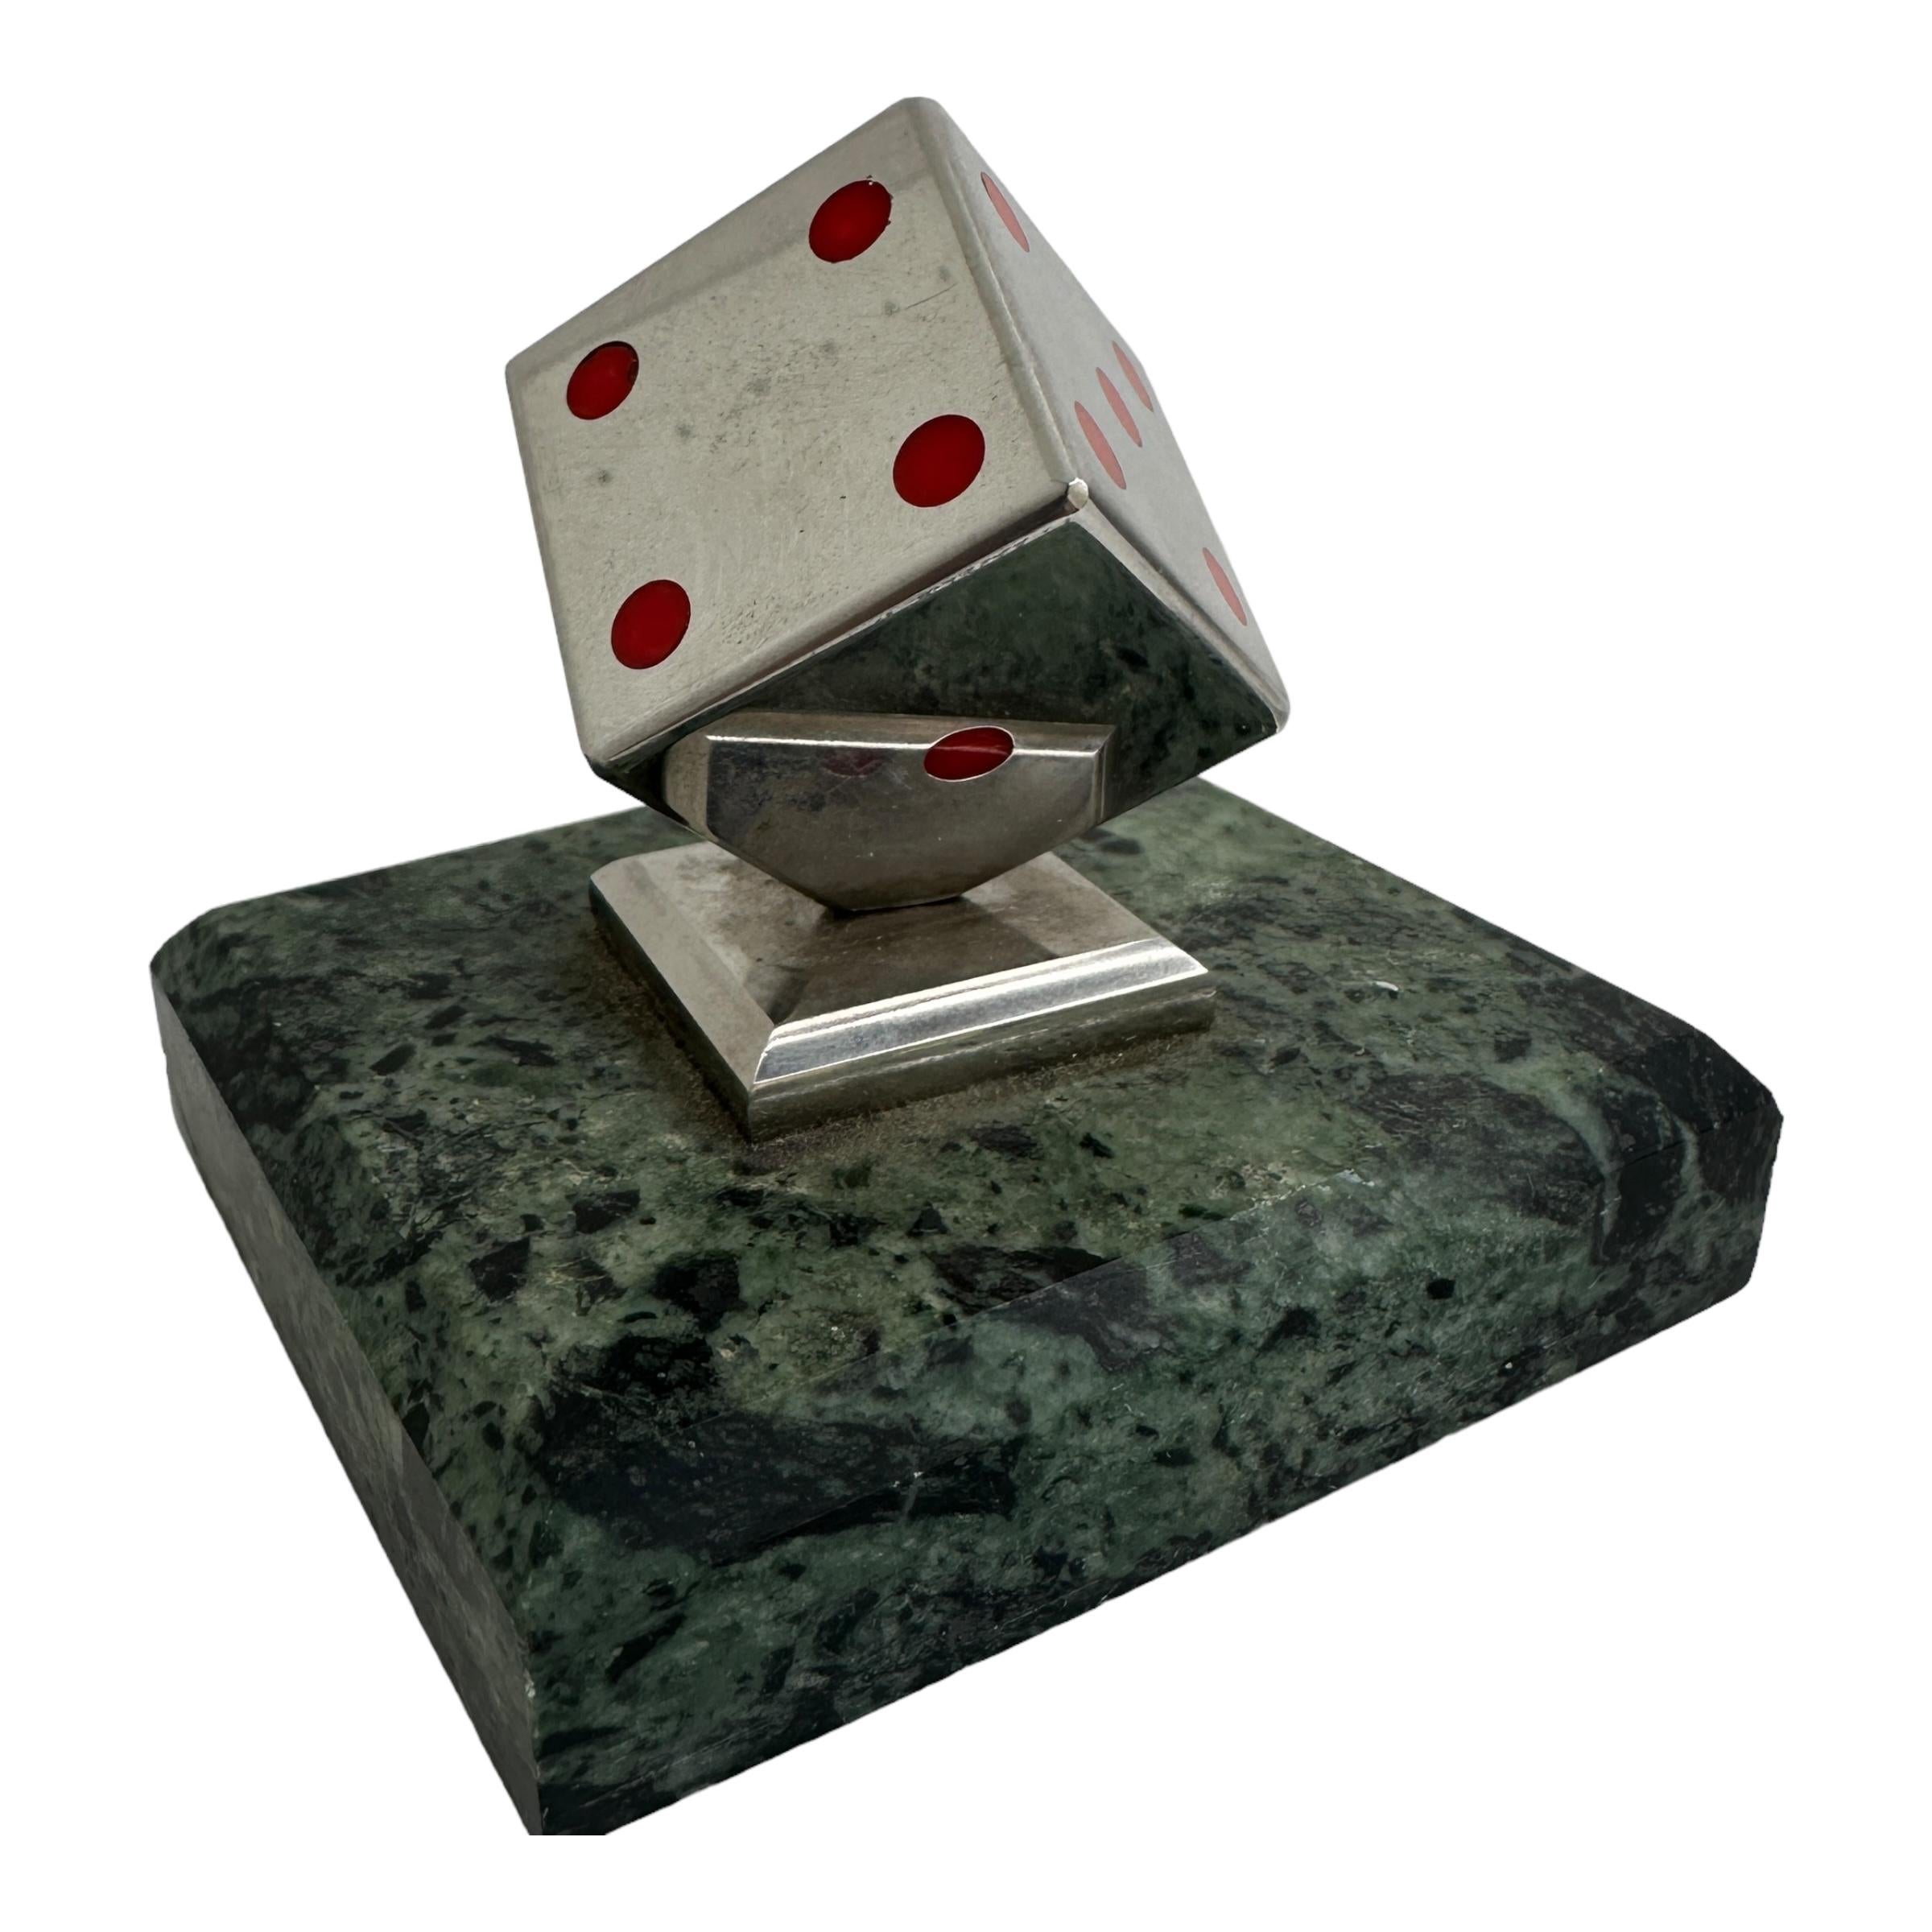 Dice Metal Statue on Marble Base Paper Weight Mid-Century Modern, German, 1970s For Sale 4